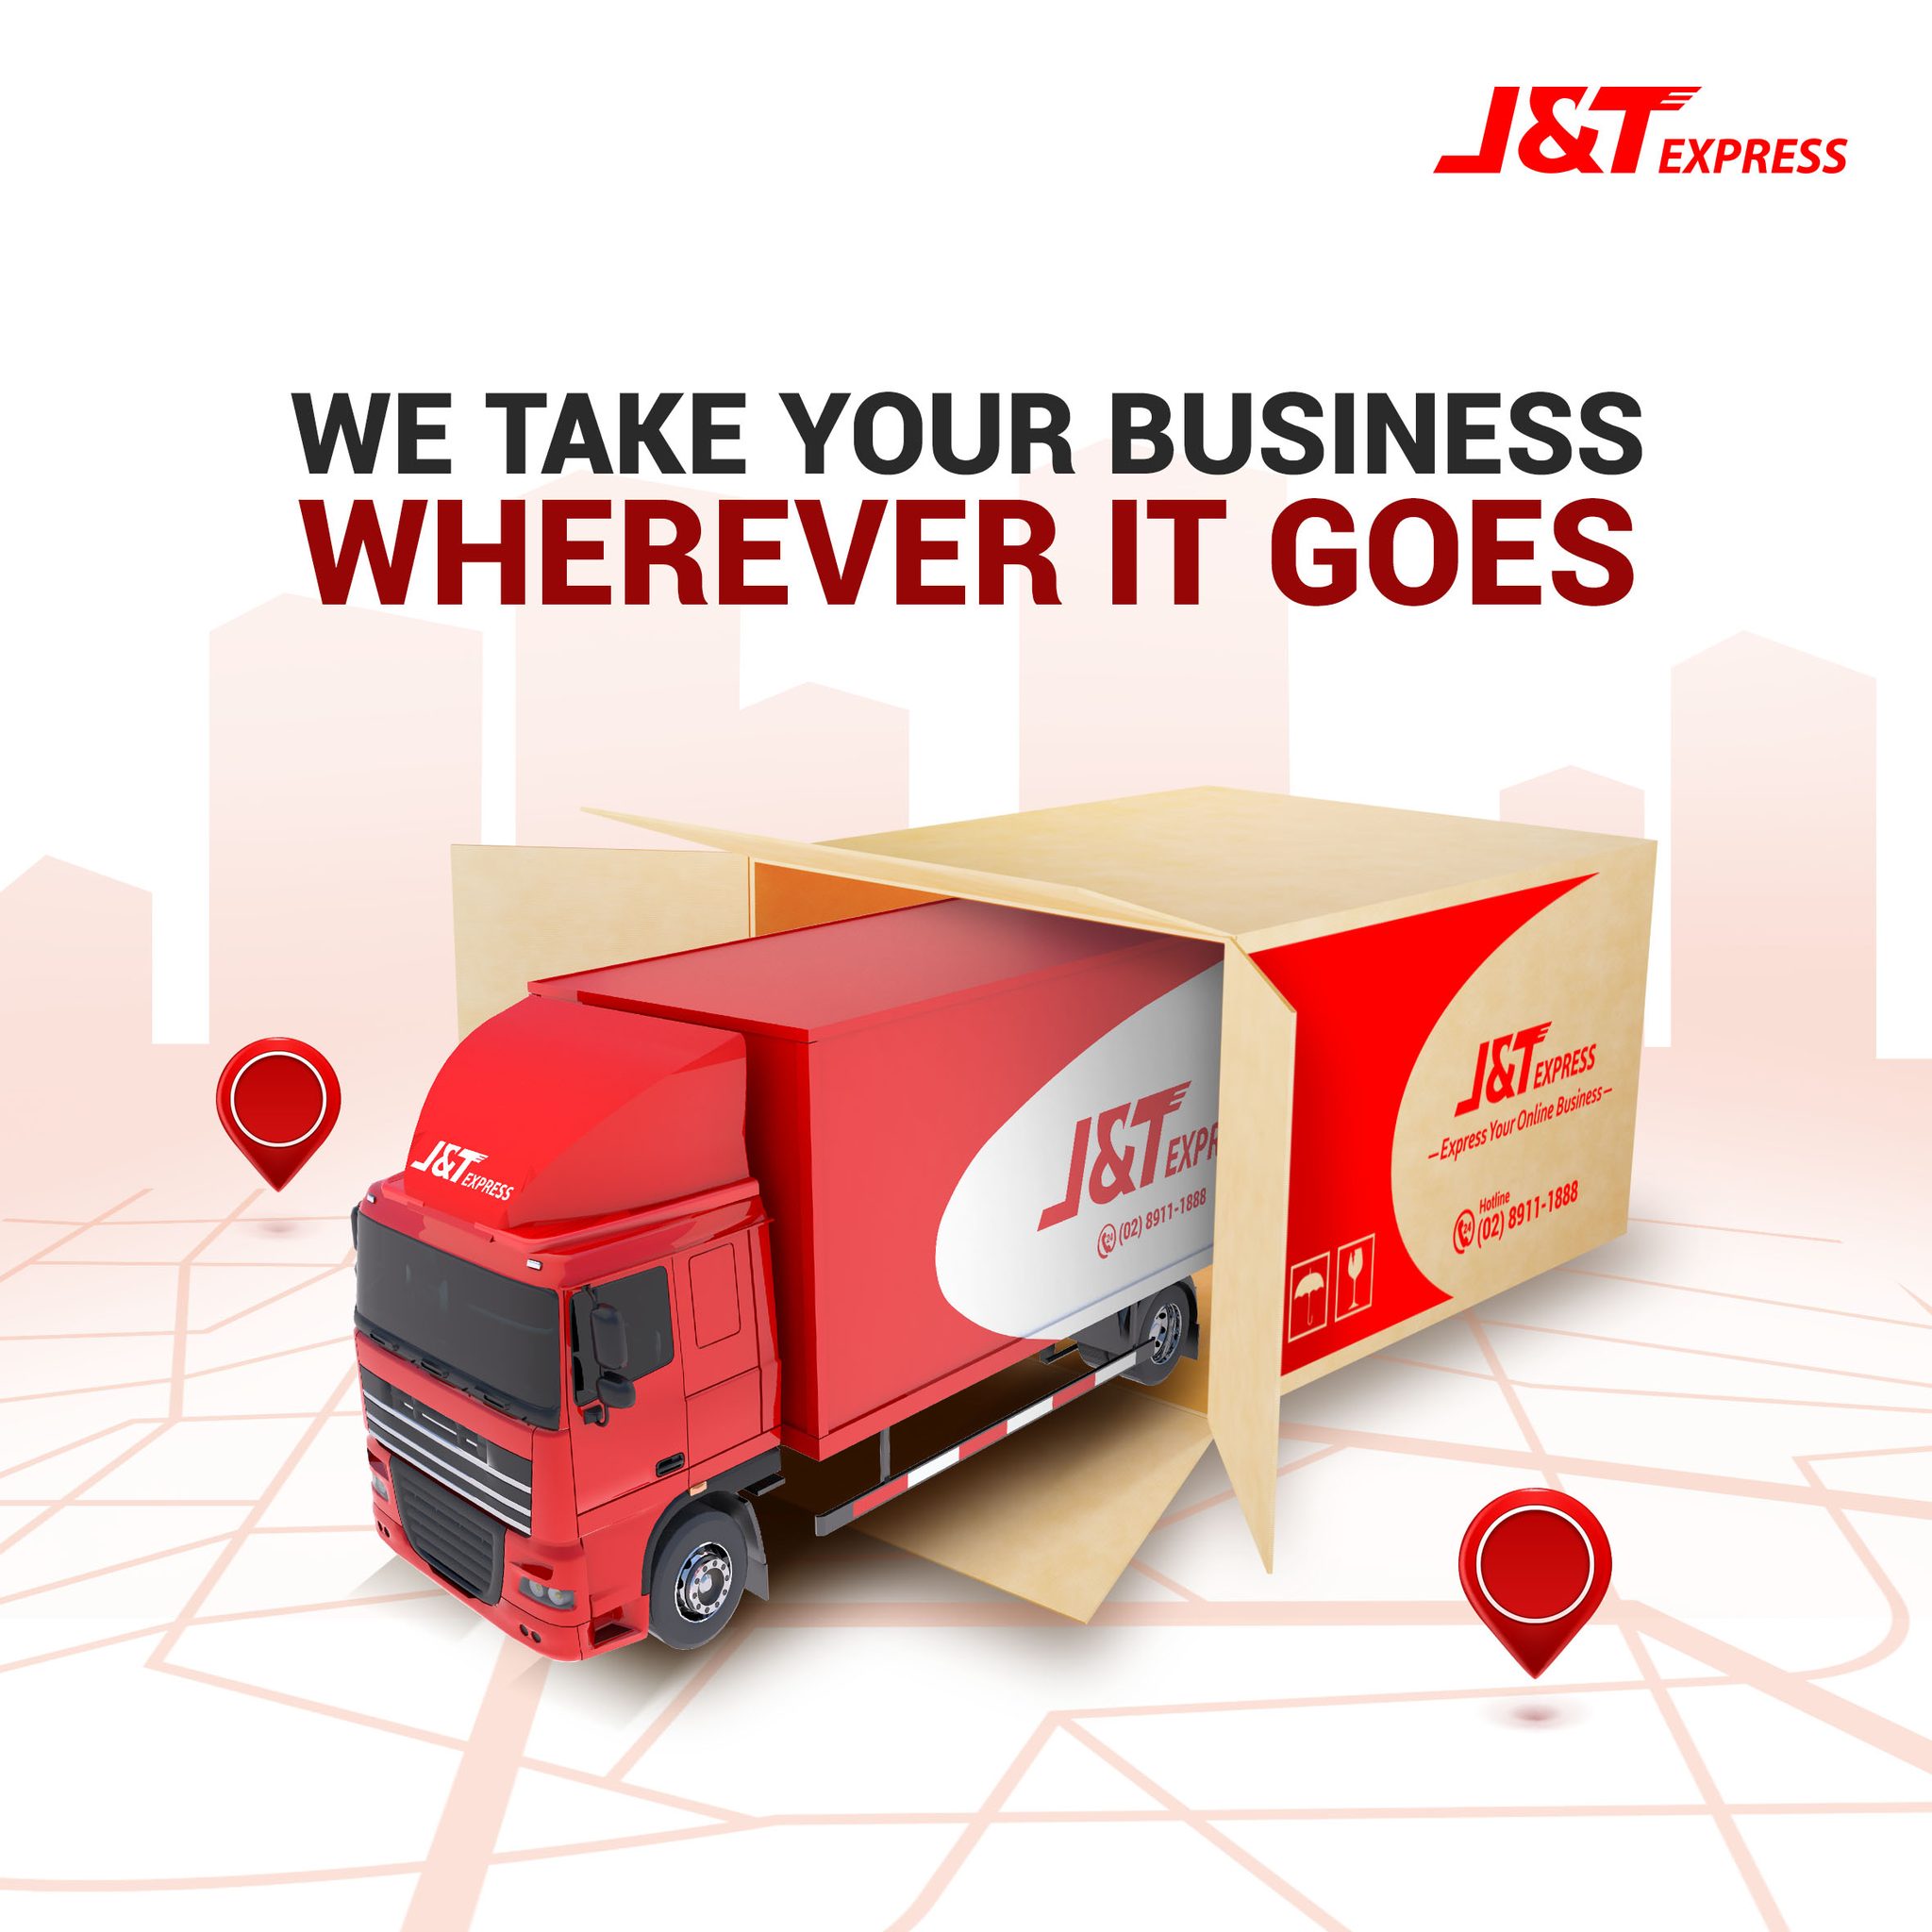 what is j&t express